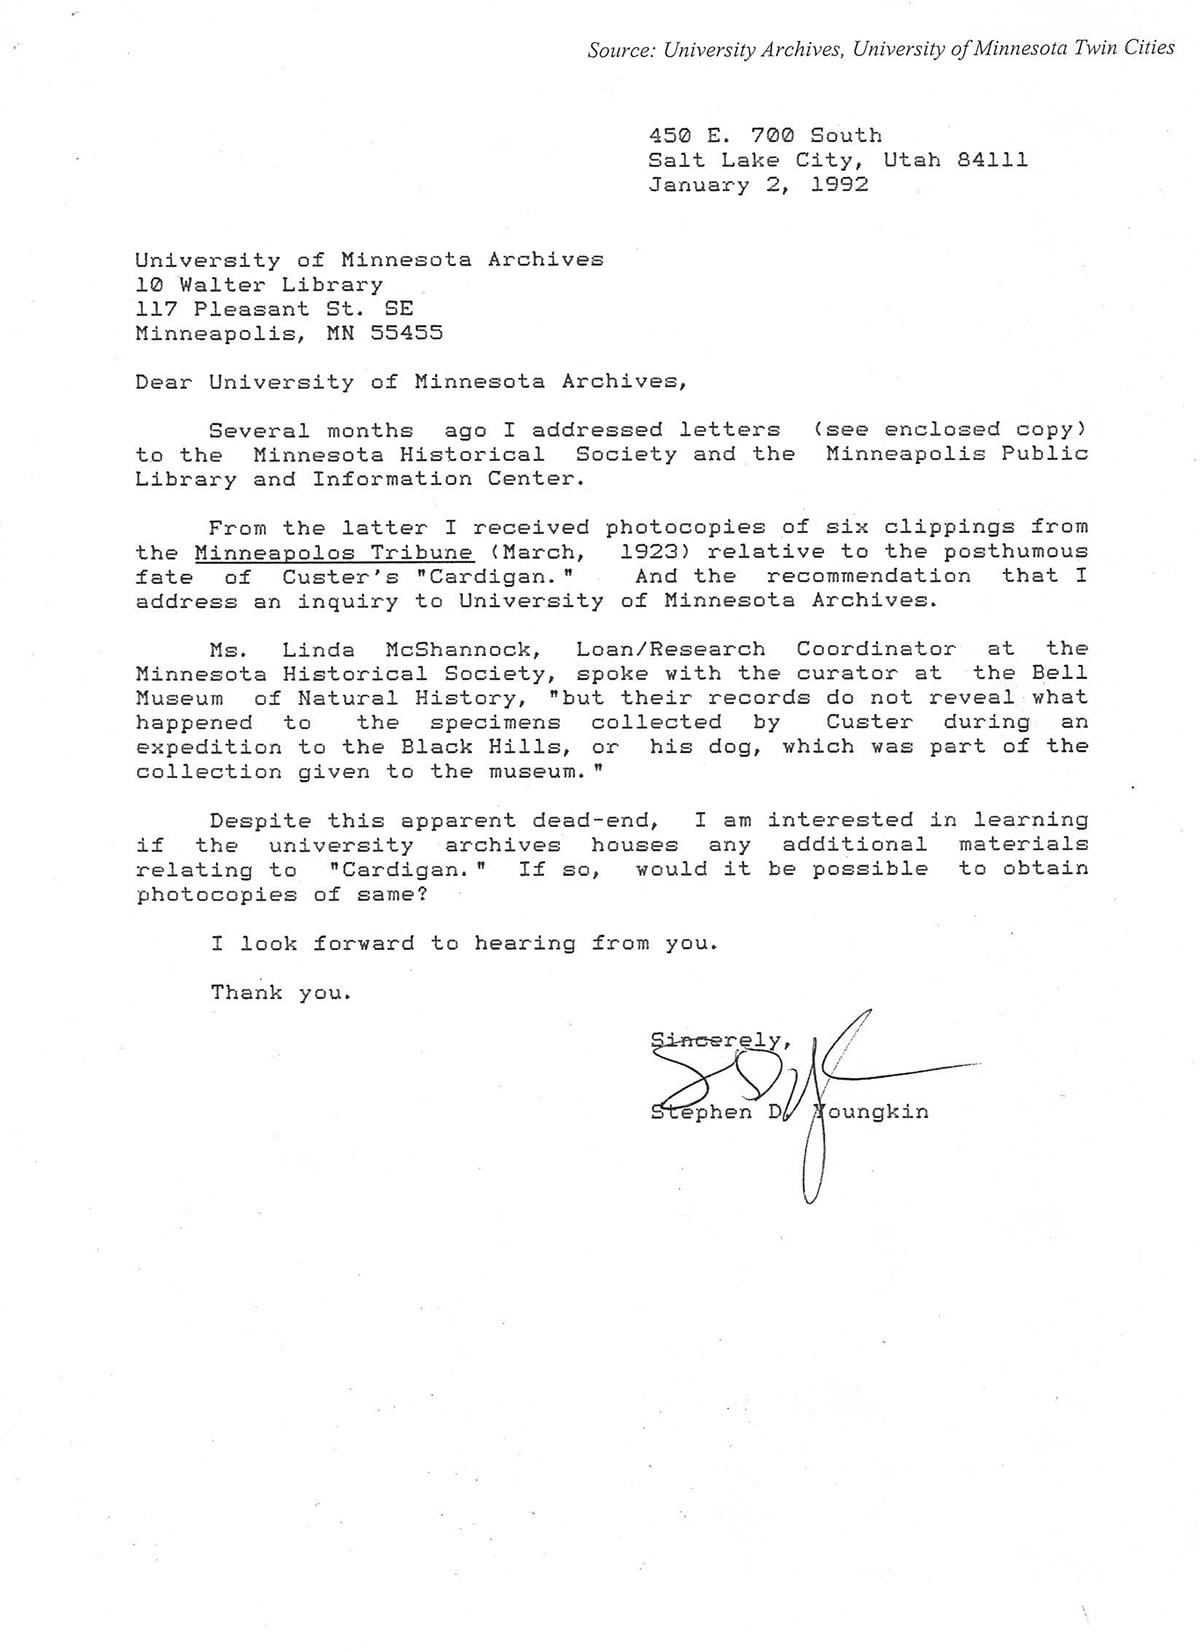 Youngkin's letter to Kroesch at University Archives - January 2, 1992